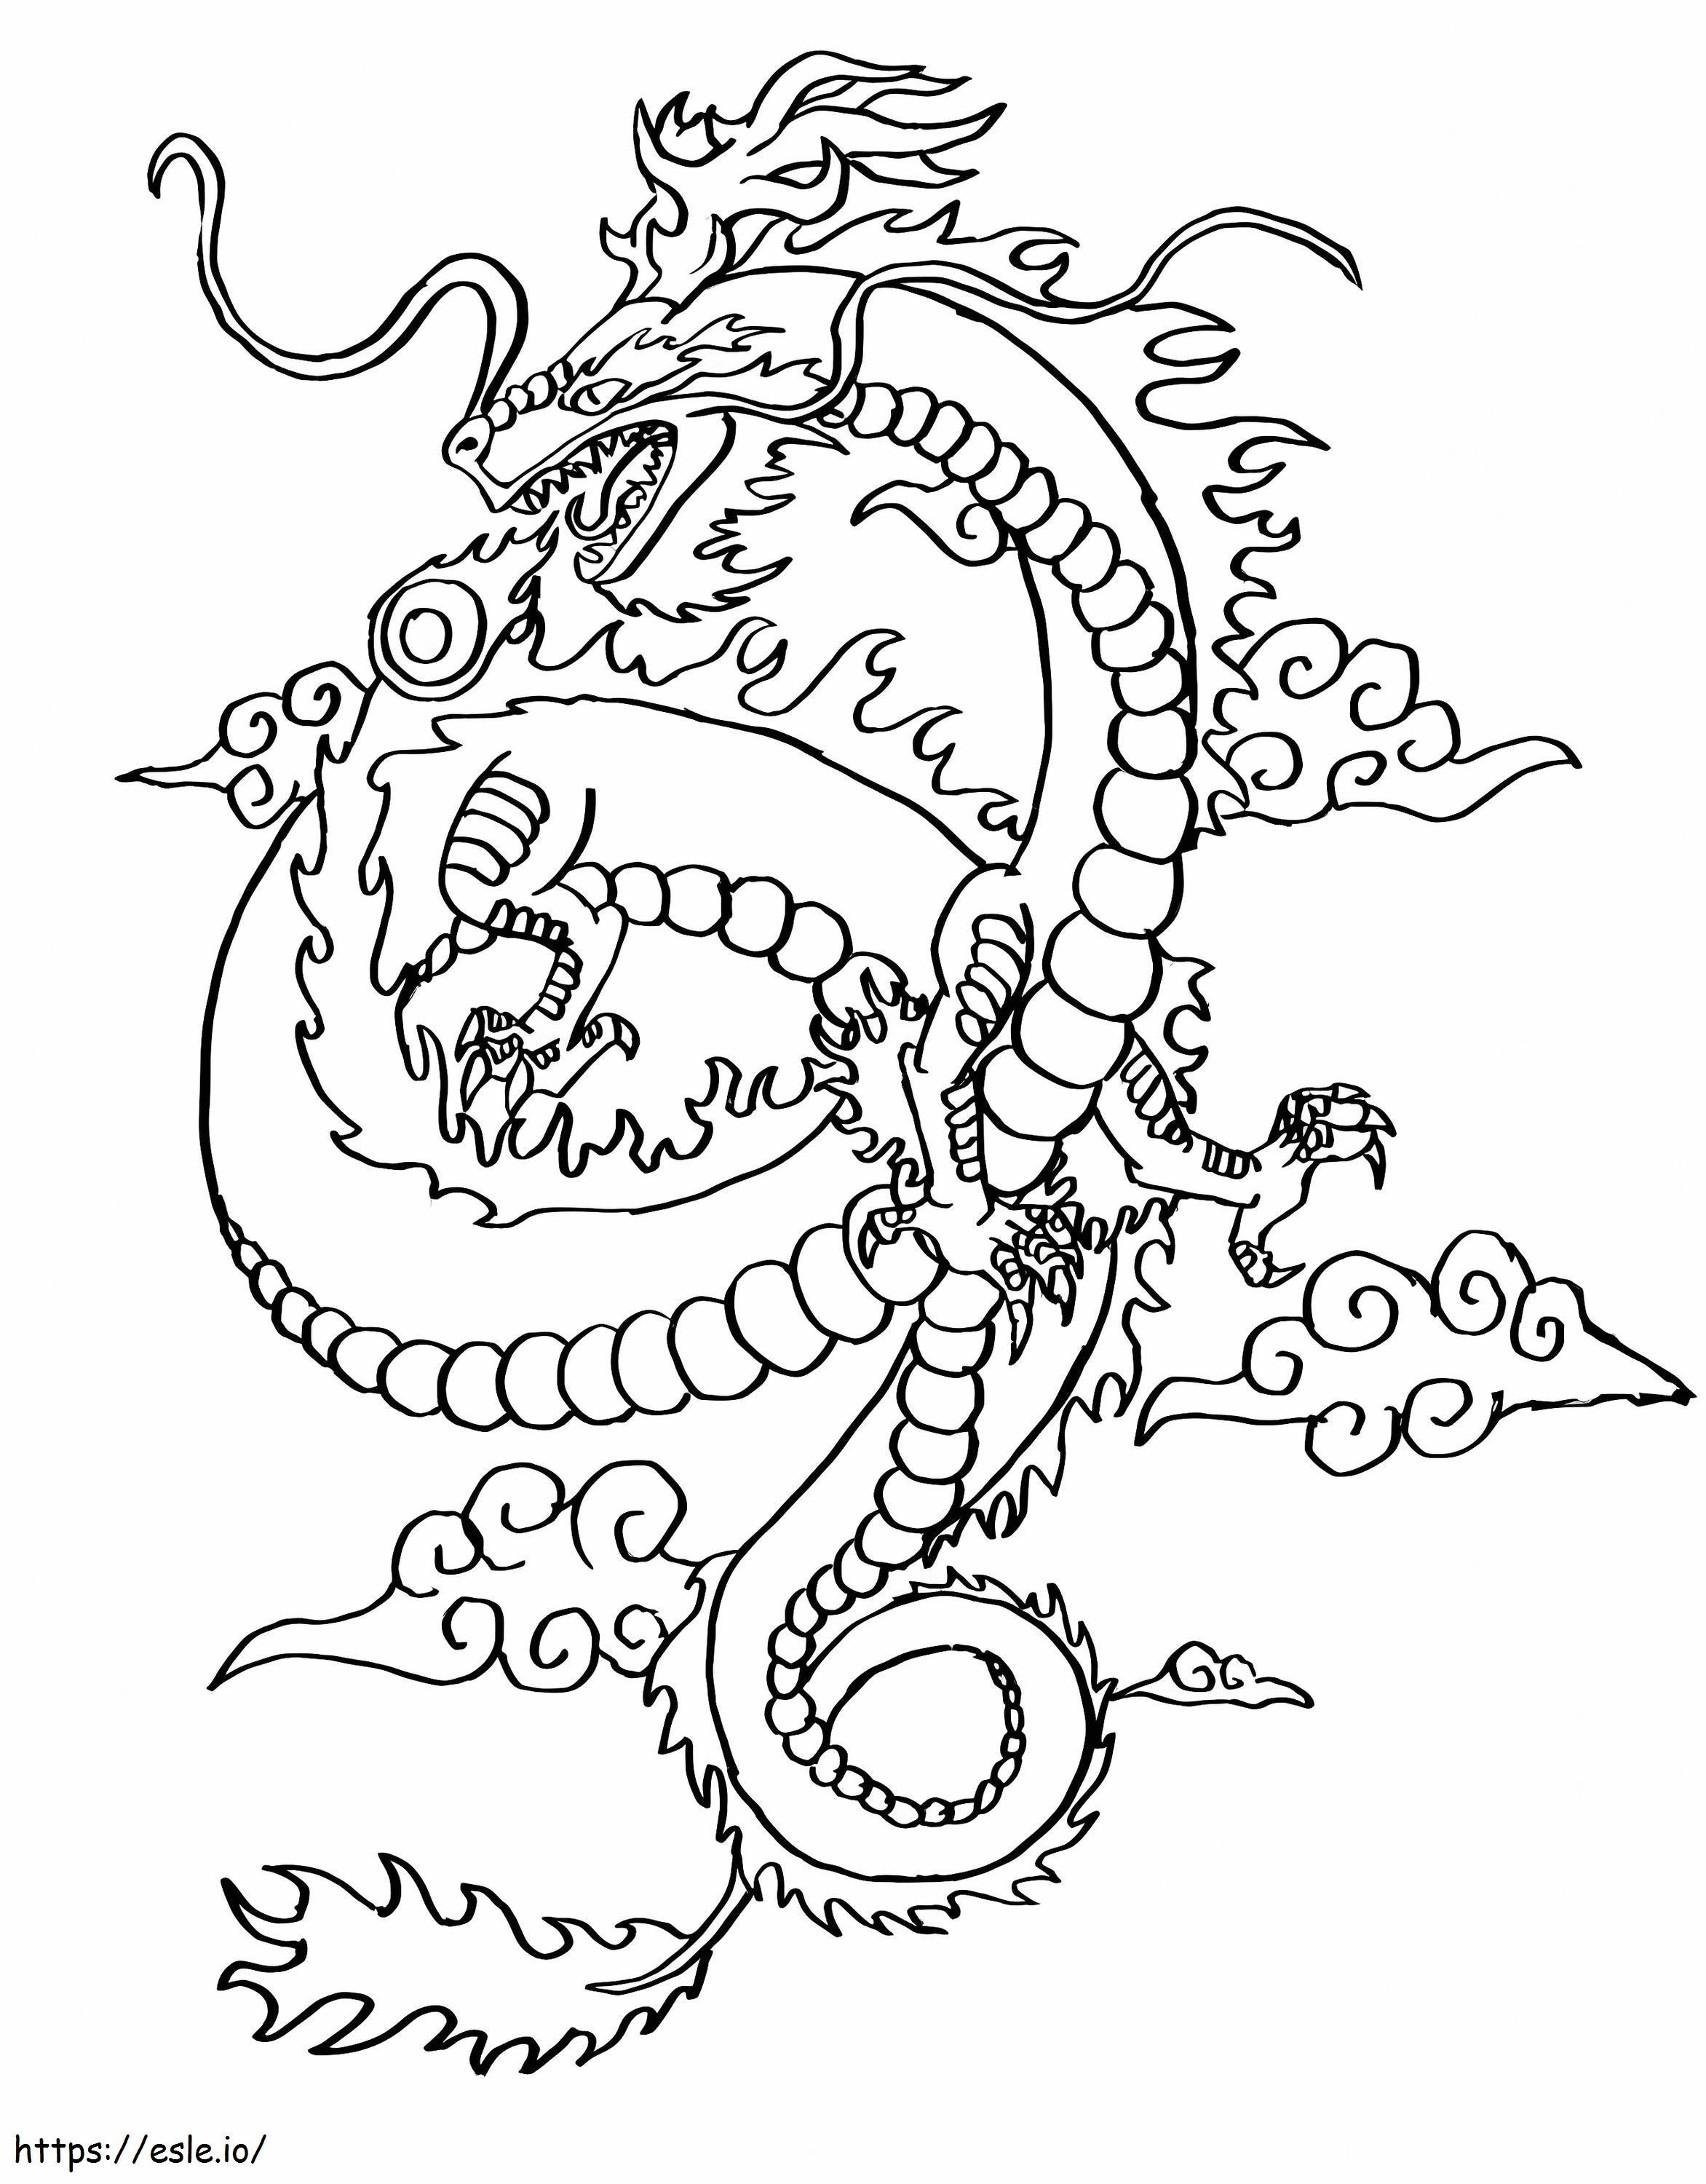 Long Chinese Dragon coloring page